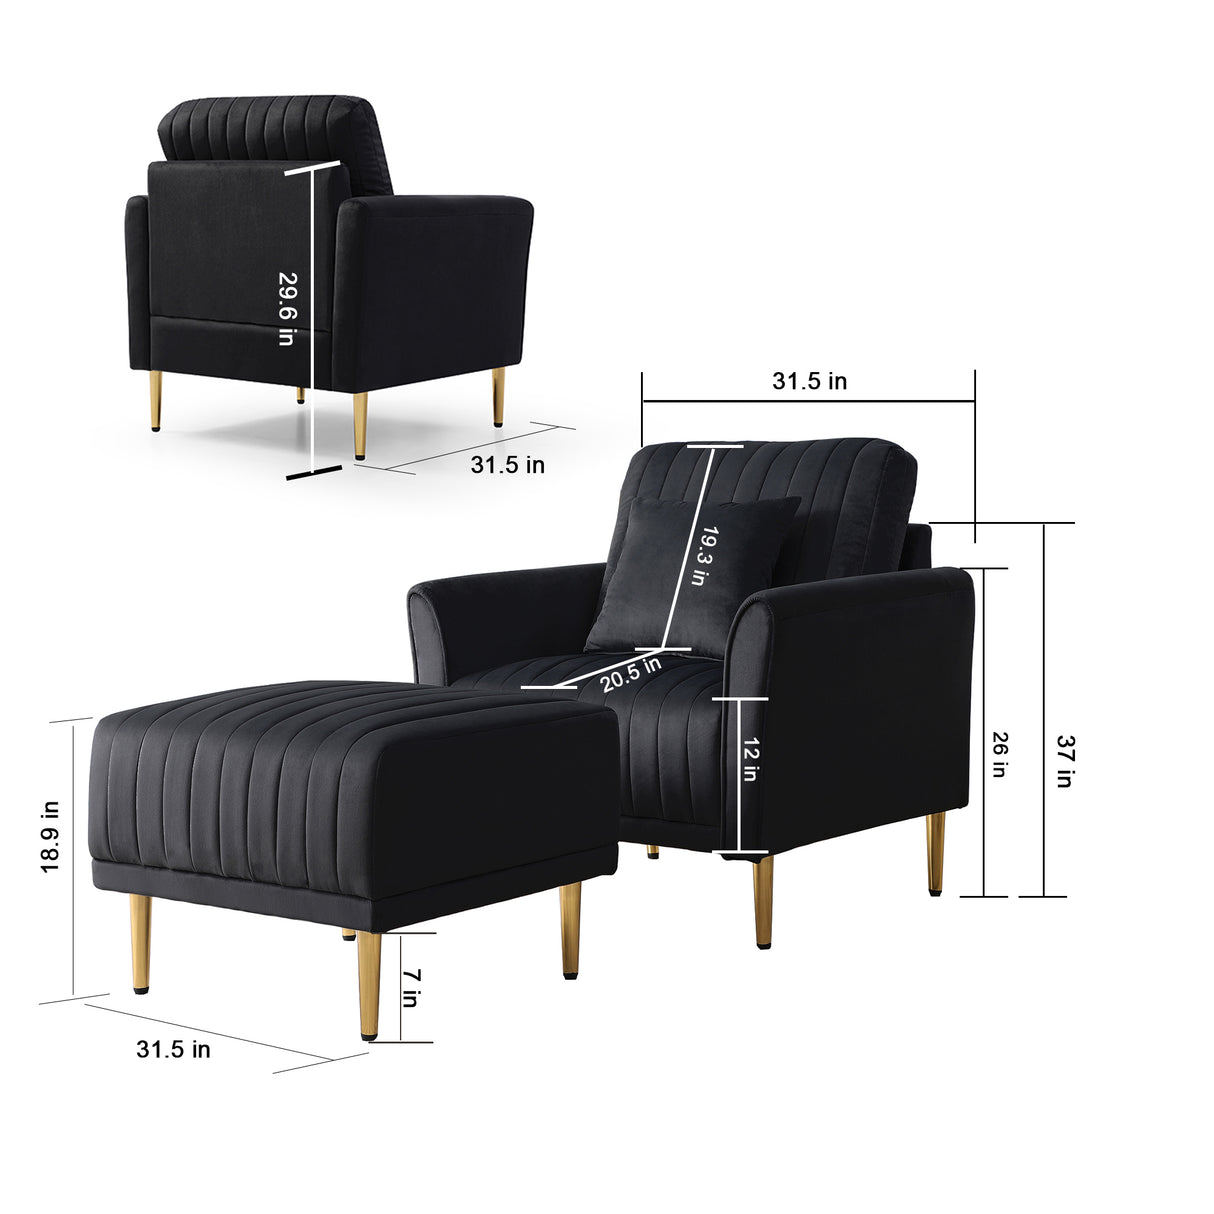 Black Velvet Armchair With Ottoman Single Sofa Chair And Ottoman Set, Comfy Reading Chair Leisure Lounging Chair for Living Room Bedroom Home Office Home Elegance USA